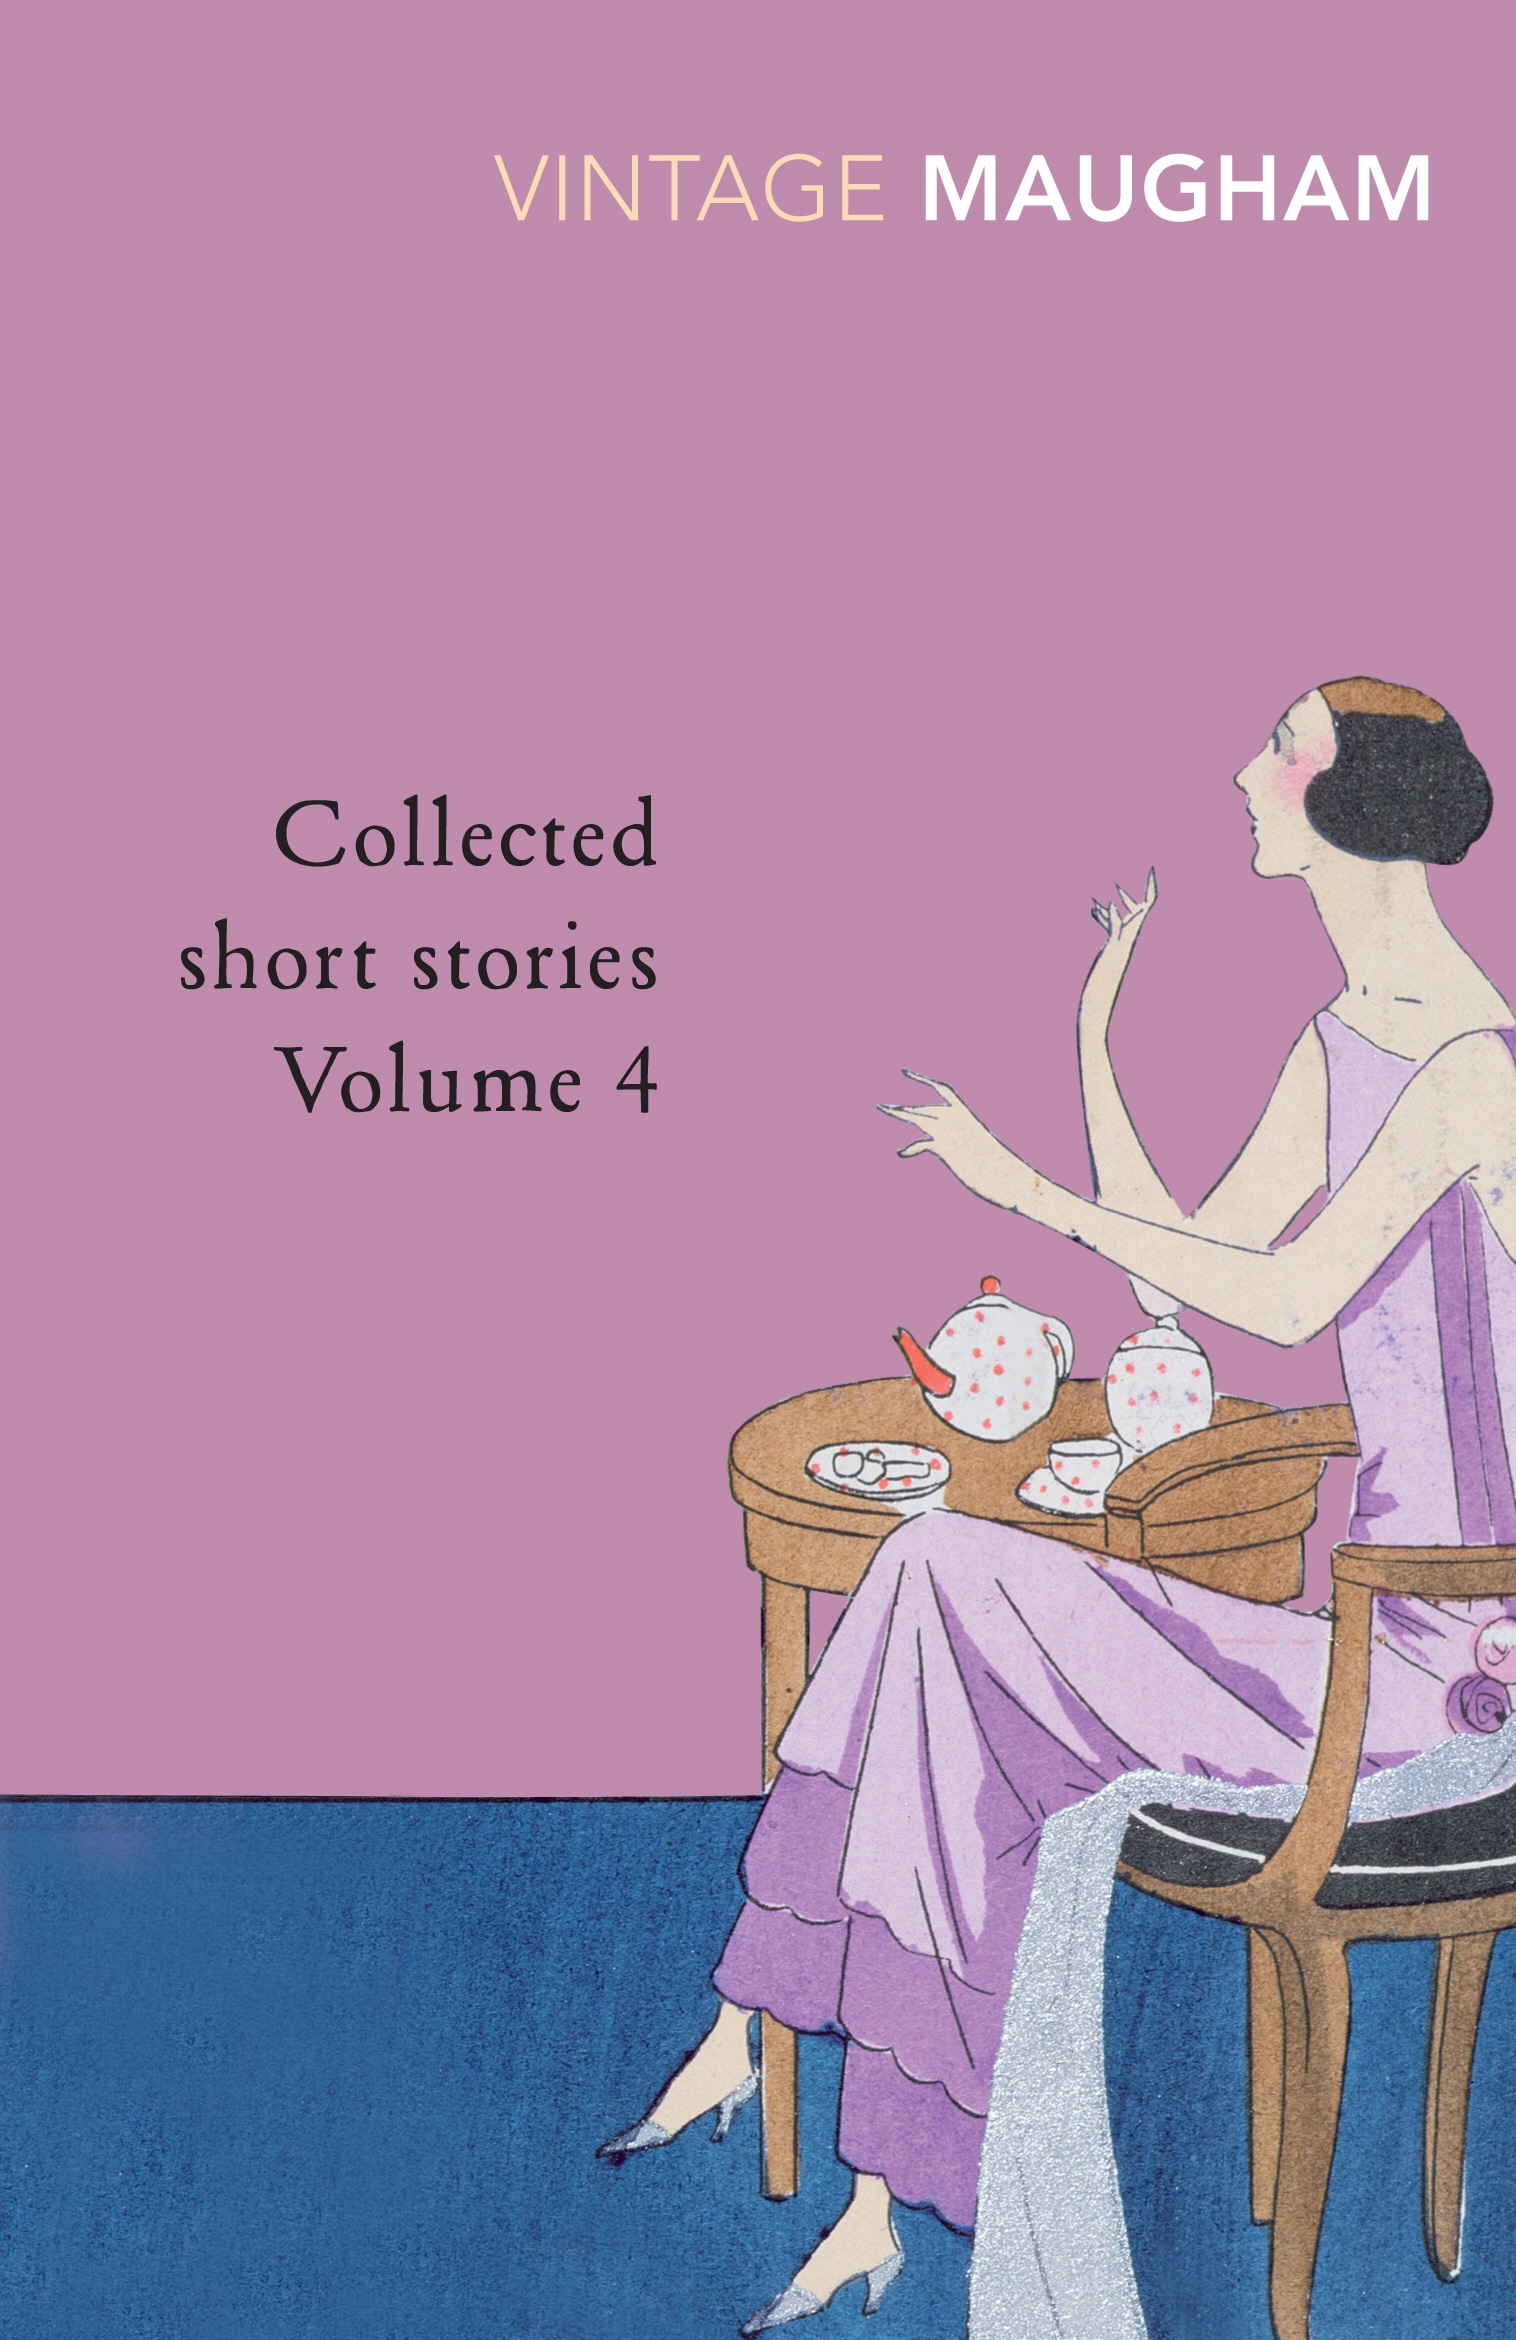 Book “Collected Short Stories Volume 4” by W. Somerset Maugham — March 7, 2002